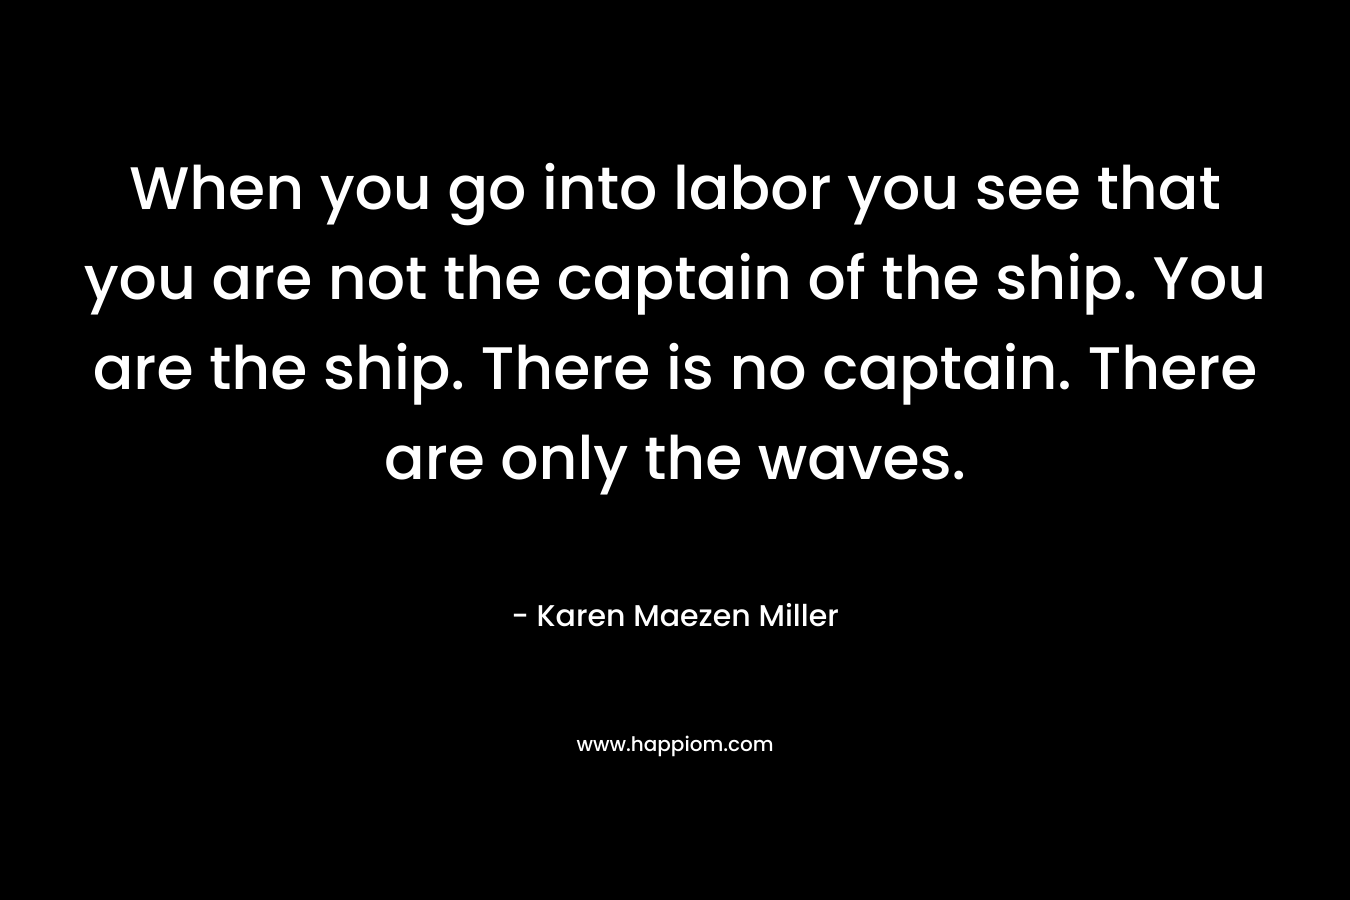 When you go into labor you see that you are not the captain of the ship. You are the ship. There is no captain. There are only the waves.